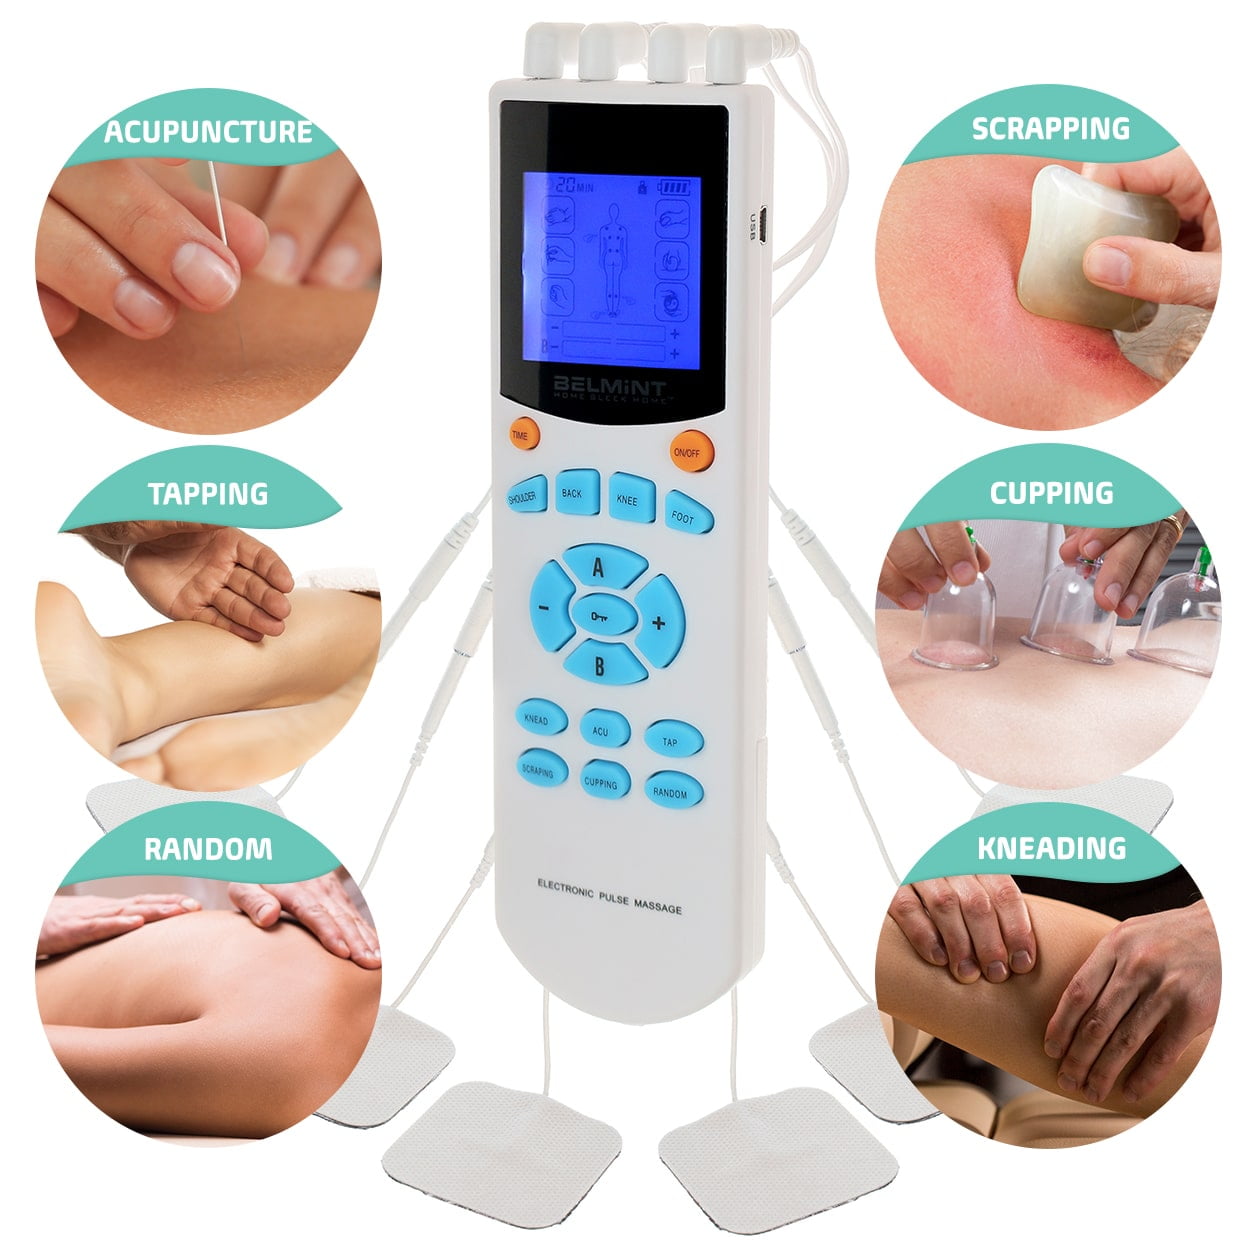 Tens Unit Electric Pulse Massager Muscle Stimulator Nerve Therapy Pain  Relief US